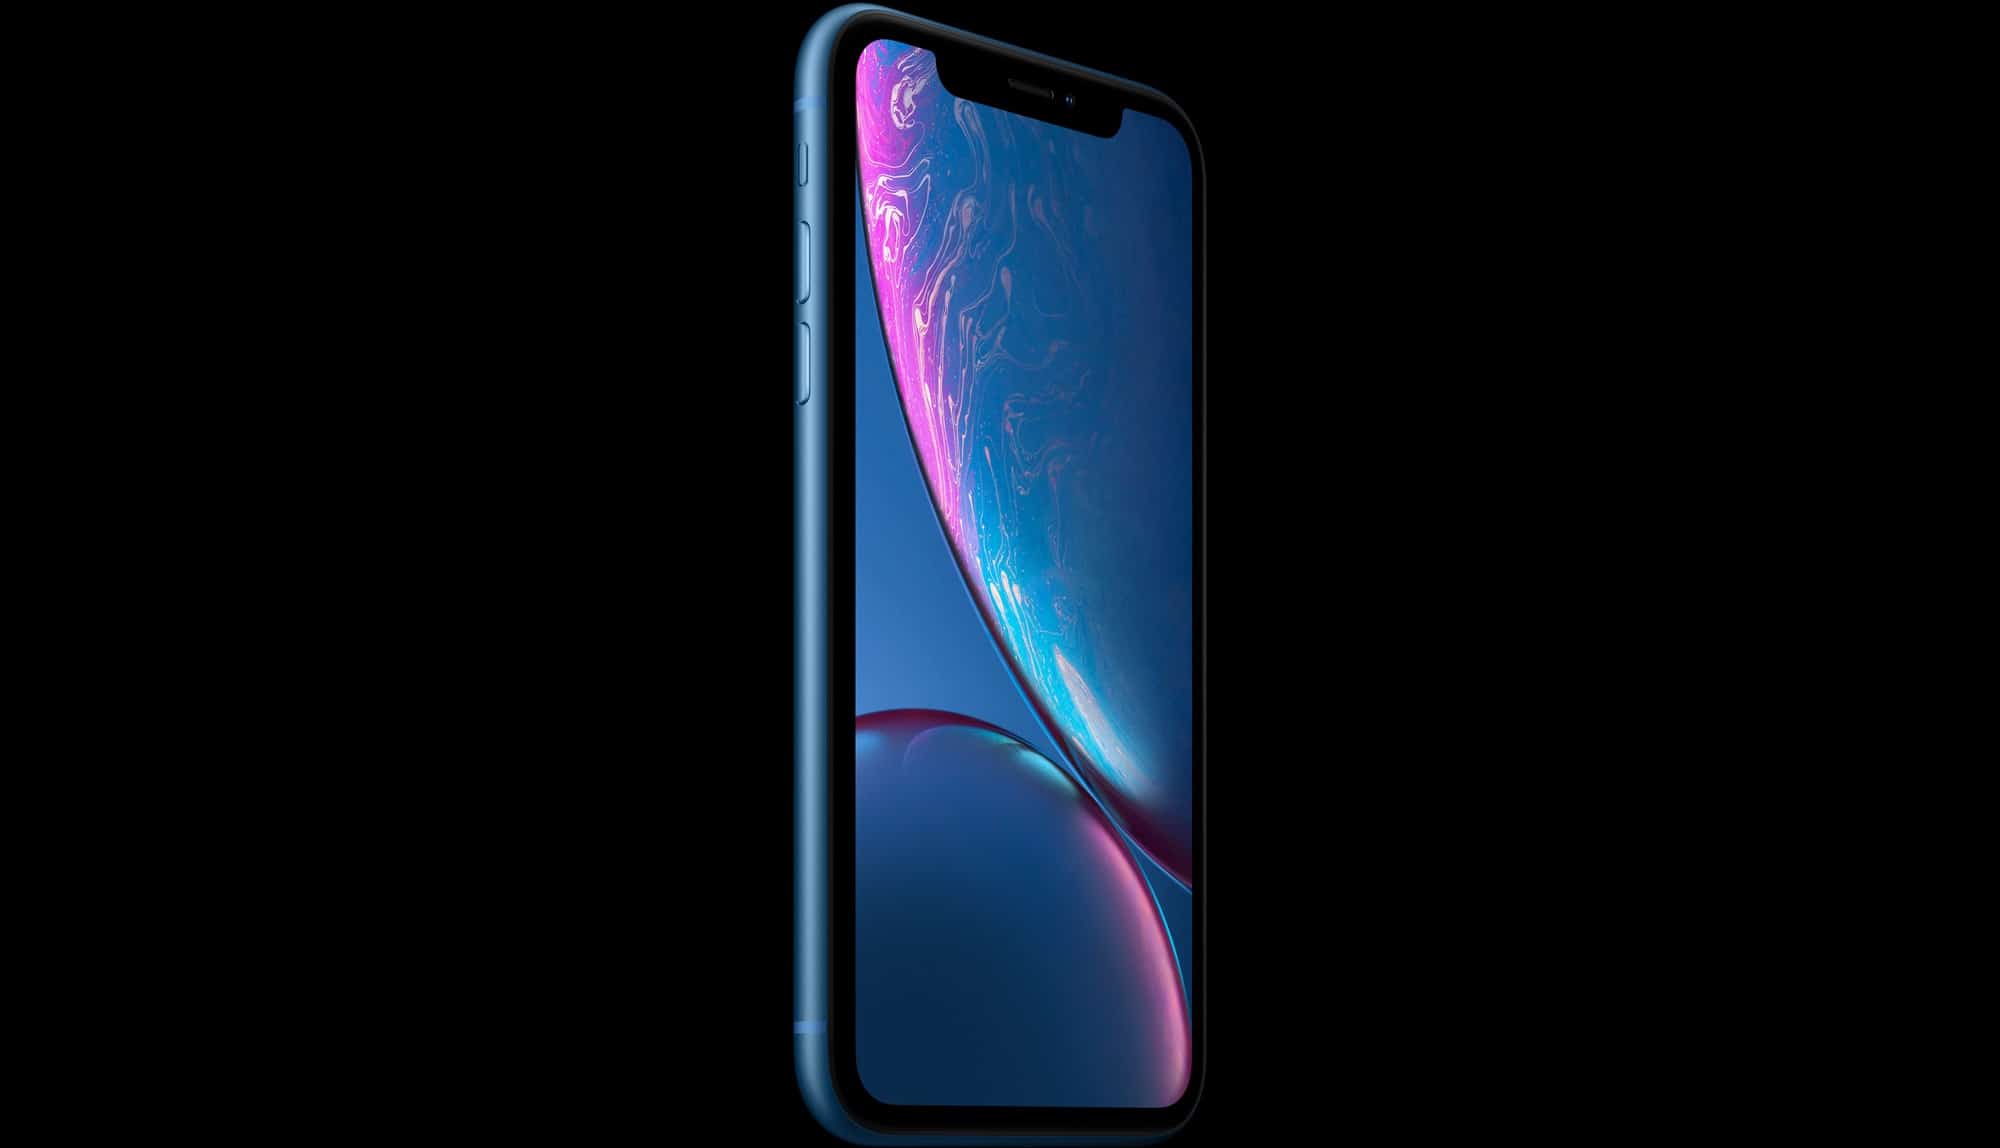 The iPhone XR will feature Haptic Touch. But just what is that?